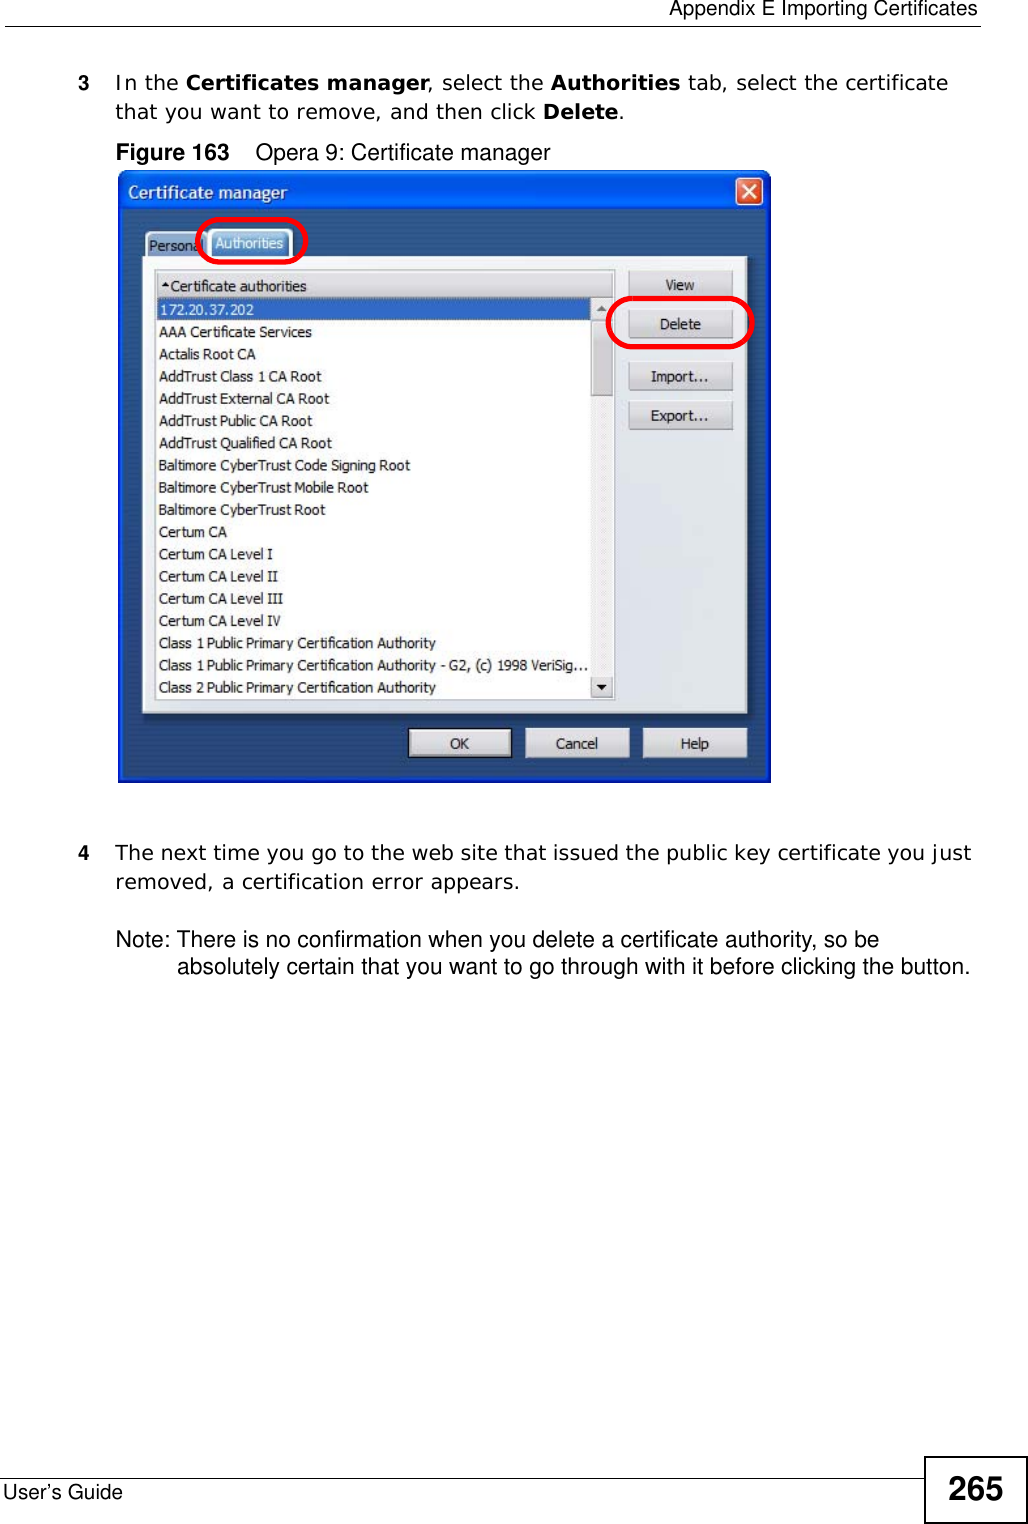  Appendix E Importing CertificatesUser’s Guide 2653In the Certificates manager, select the Authorities tab, select the certificate that you want to remove, and then click Delete.Figure 163    Opera 9: Certificate manager4The next time you go to the web site that issued the public key certificate you just removed, a certification error appears.Note: There is no confirmation when you delete a certificate authority, so be absolutely certain that you want to go through with it before clicking the button.